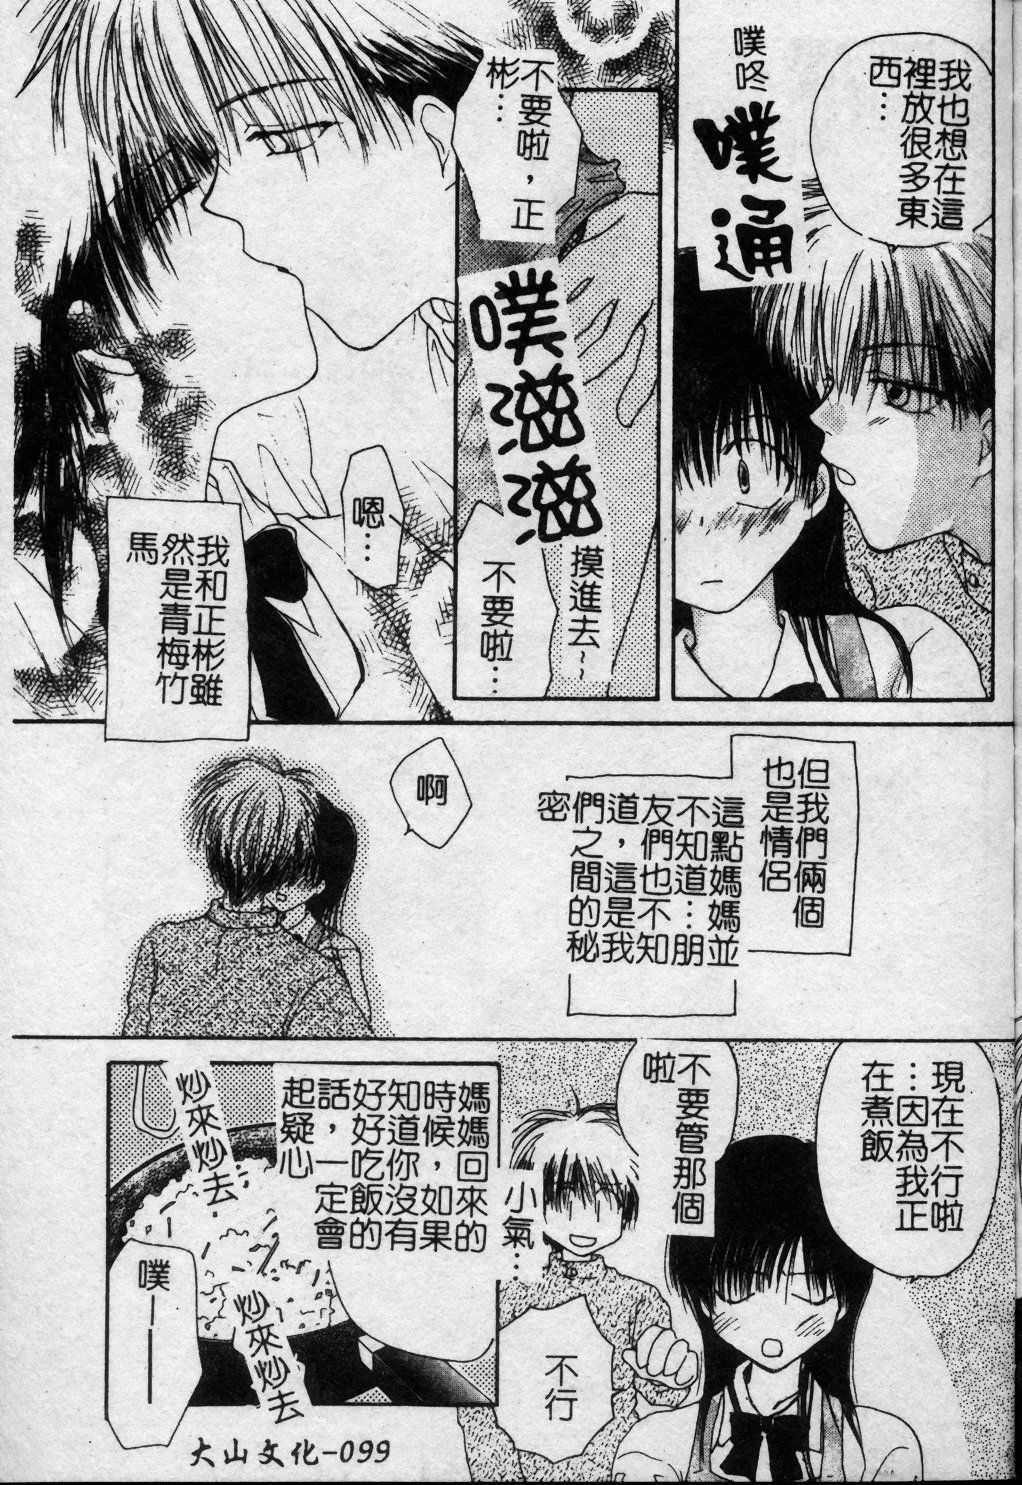 [Kuonmoxu]Do not let me alone(chinese) [くおん摩緒]別讓我孤單